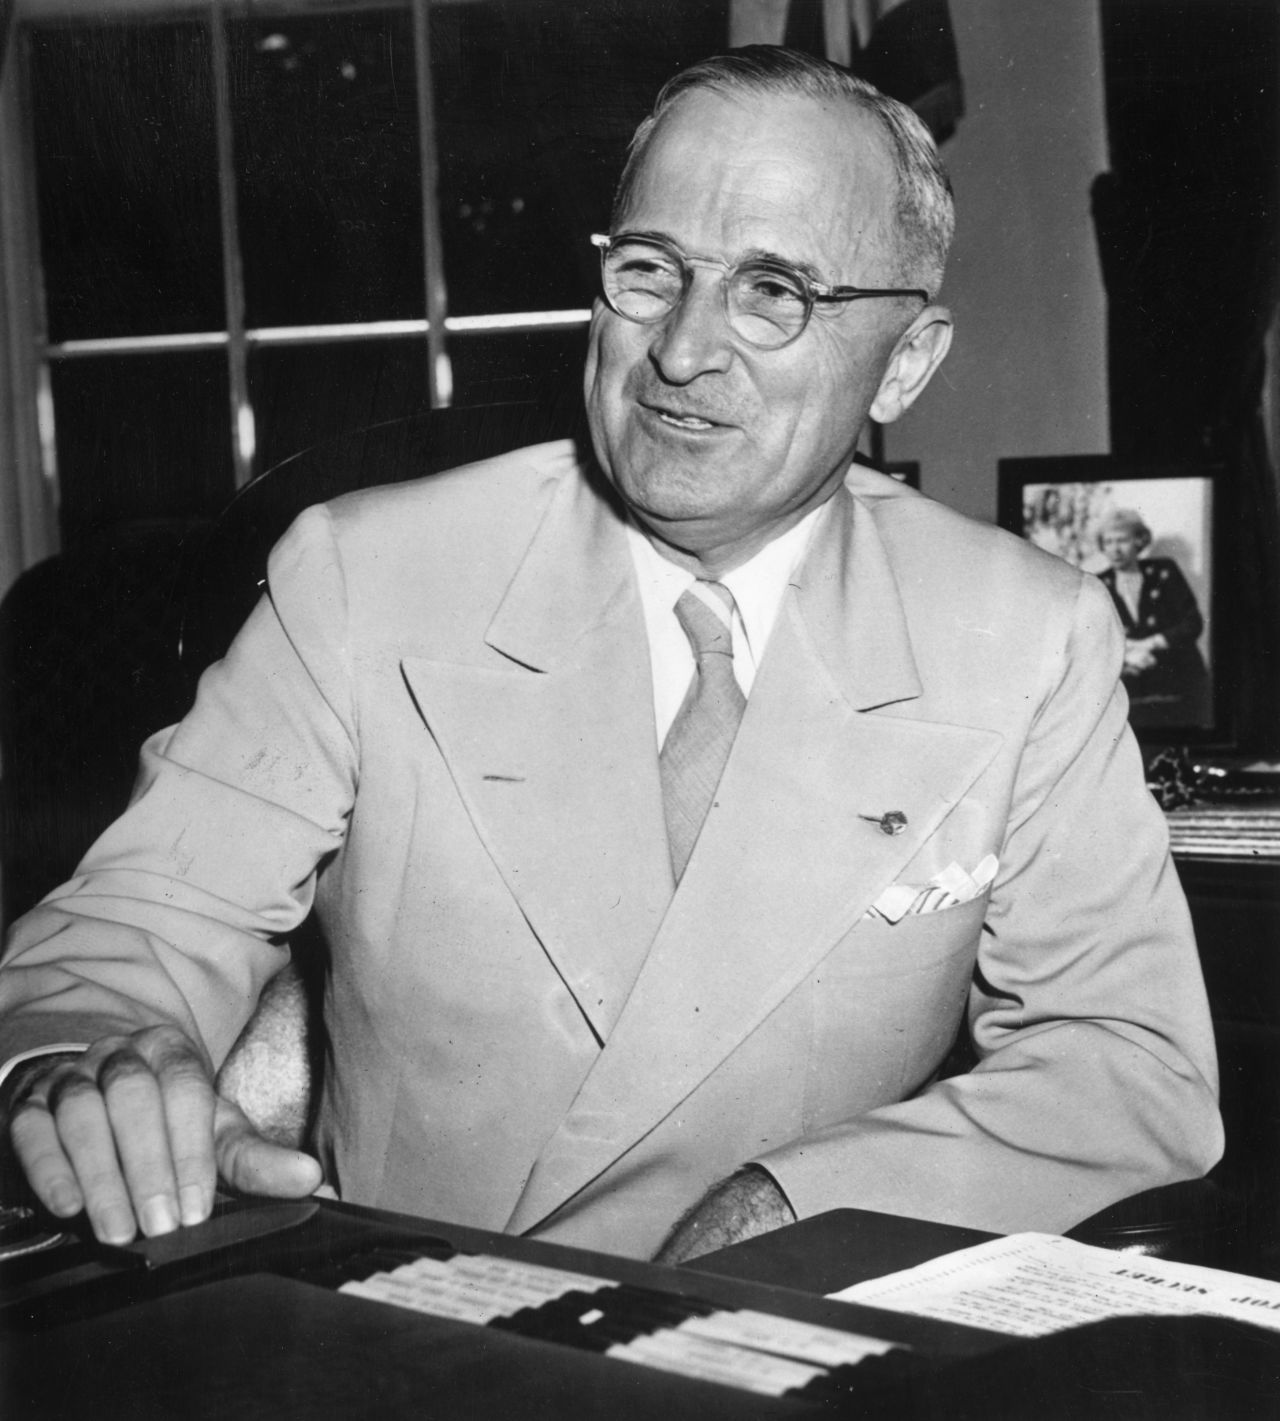 Before entering politics, Harry Truman was a haberdasher, the owner of a men's clothing store. The store was a failure, and he spent years repaying related debts. He fared far better as a president than as a businessman, frequently ranked by historians as one of the top five presidents.